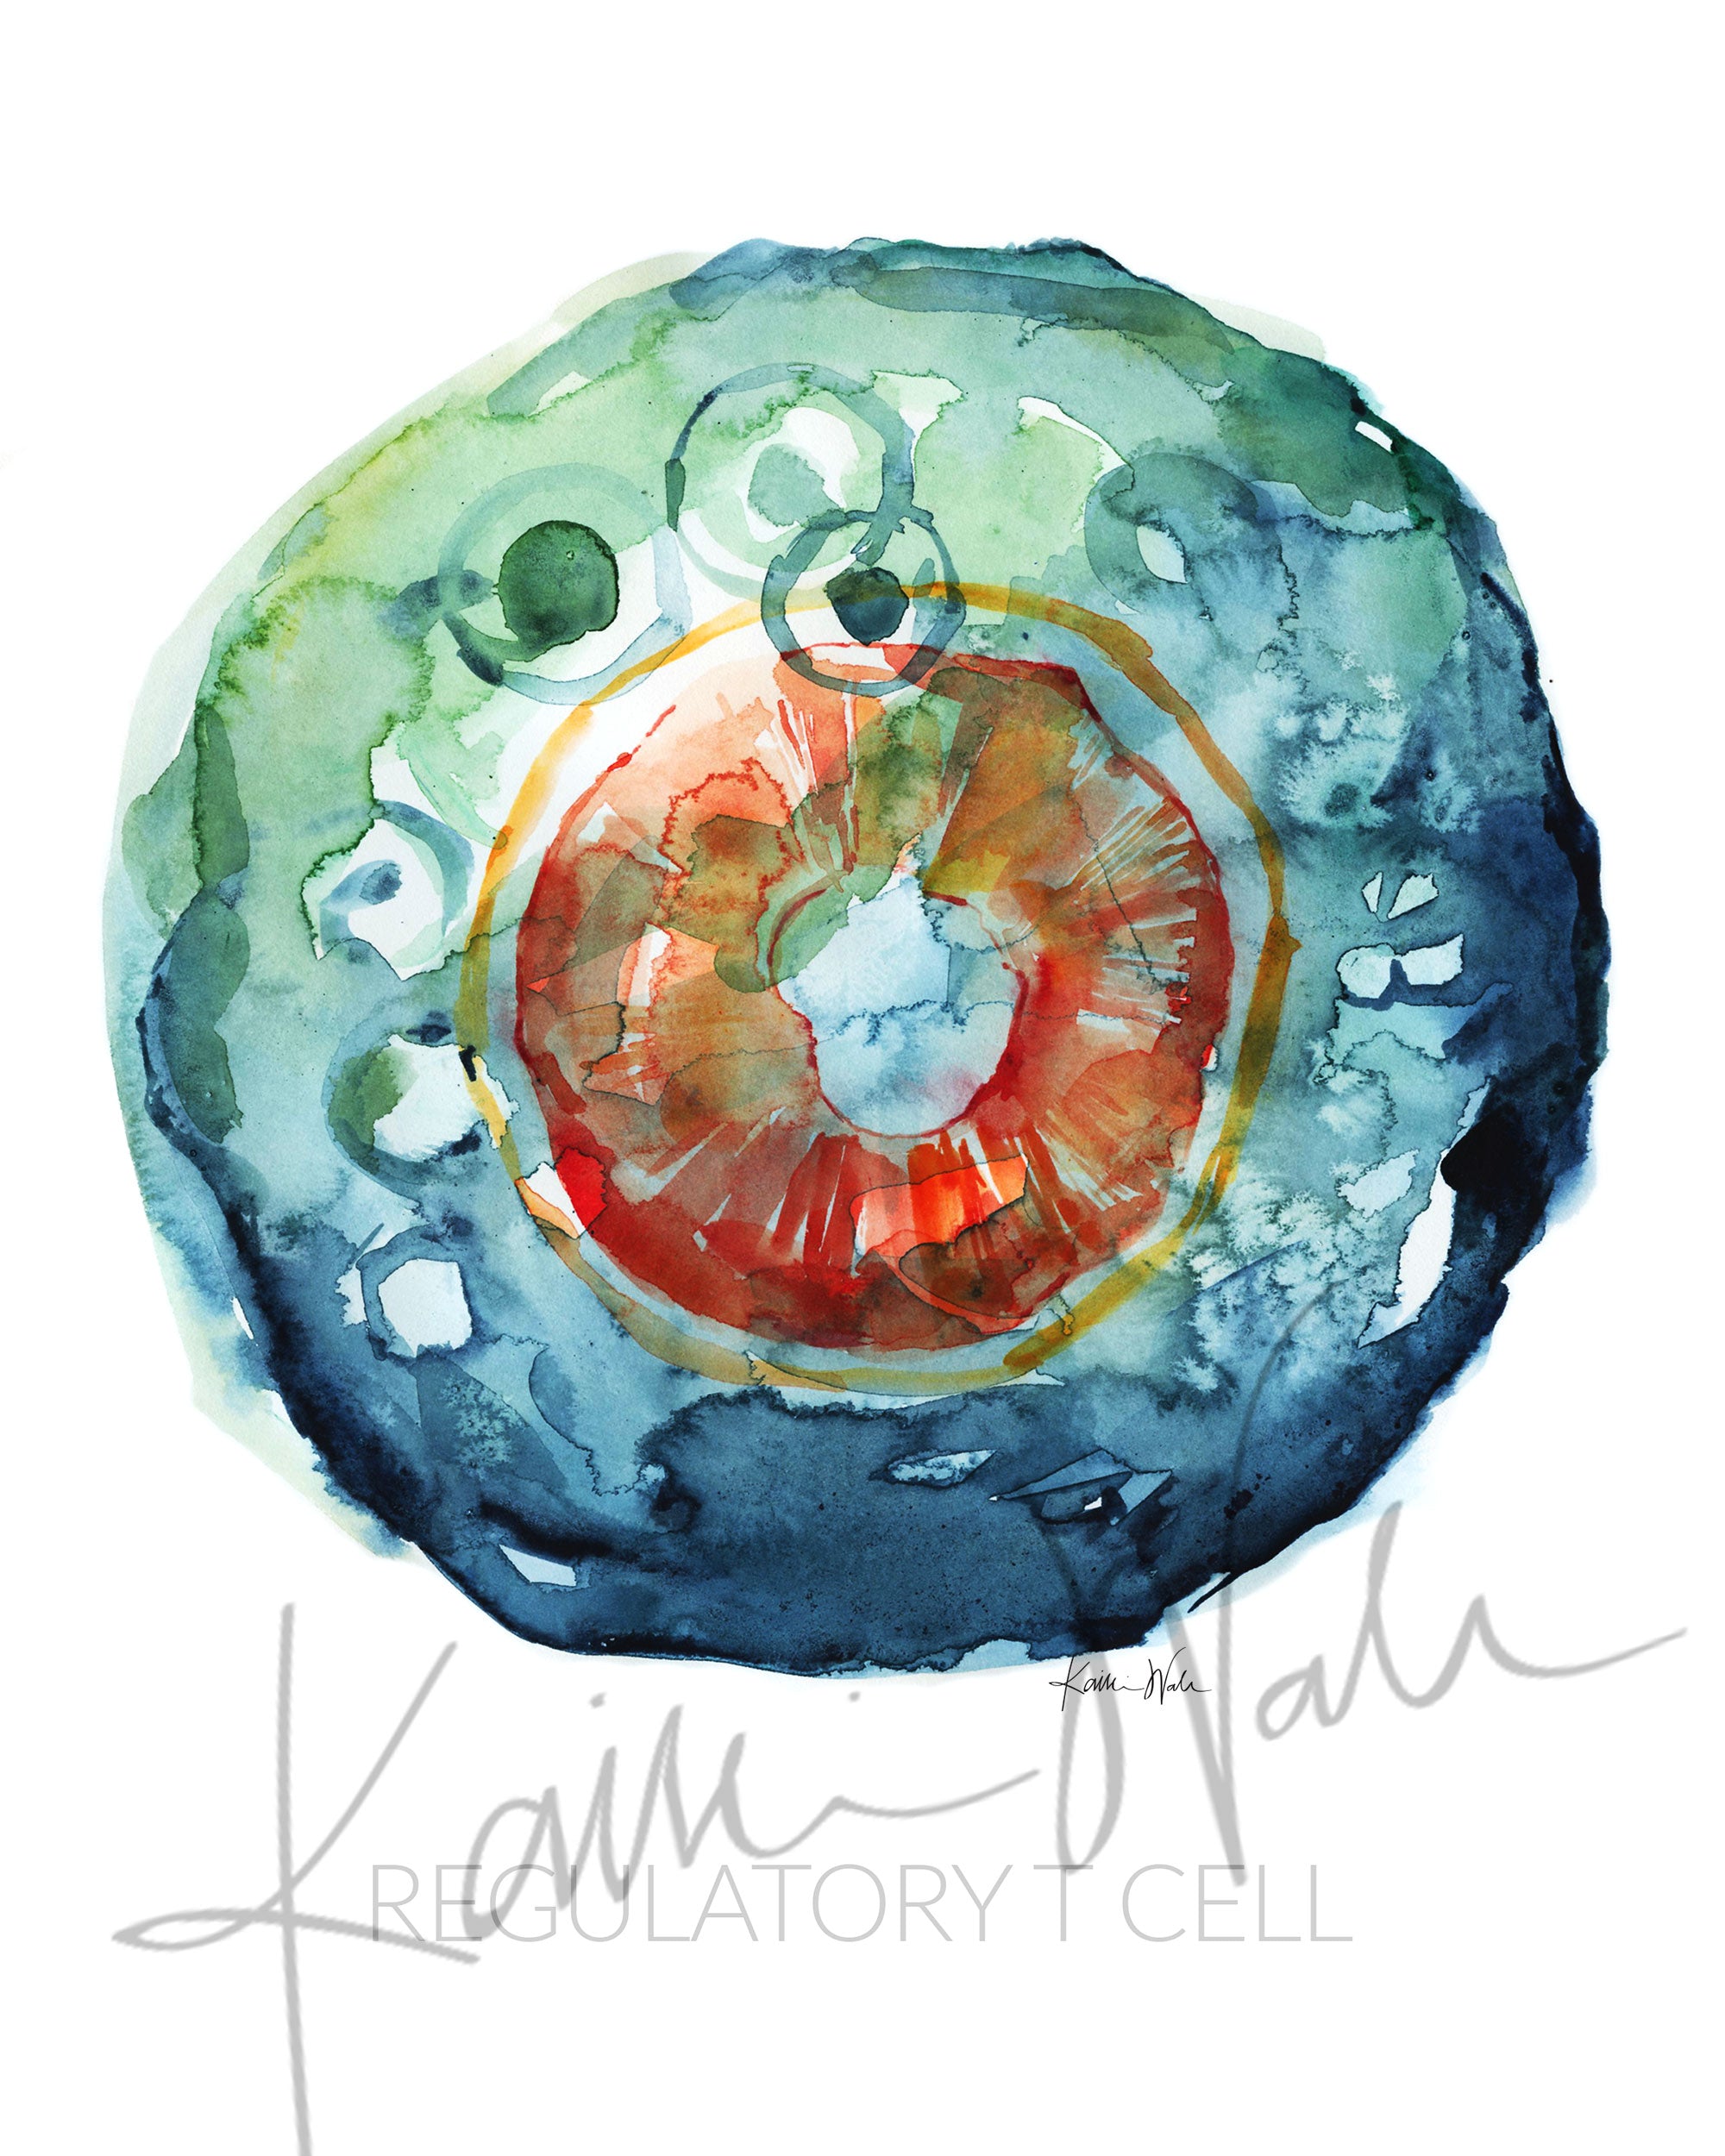 Unframed watercolor painting of a regulatory T cell.